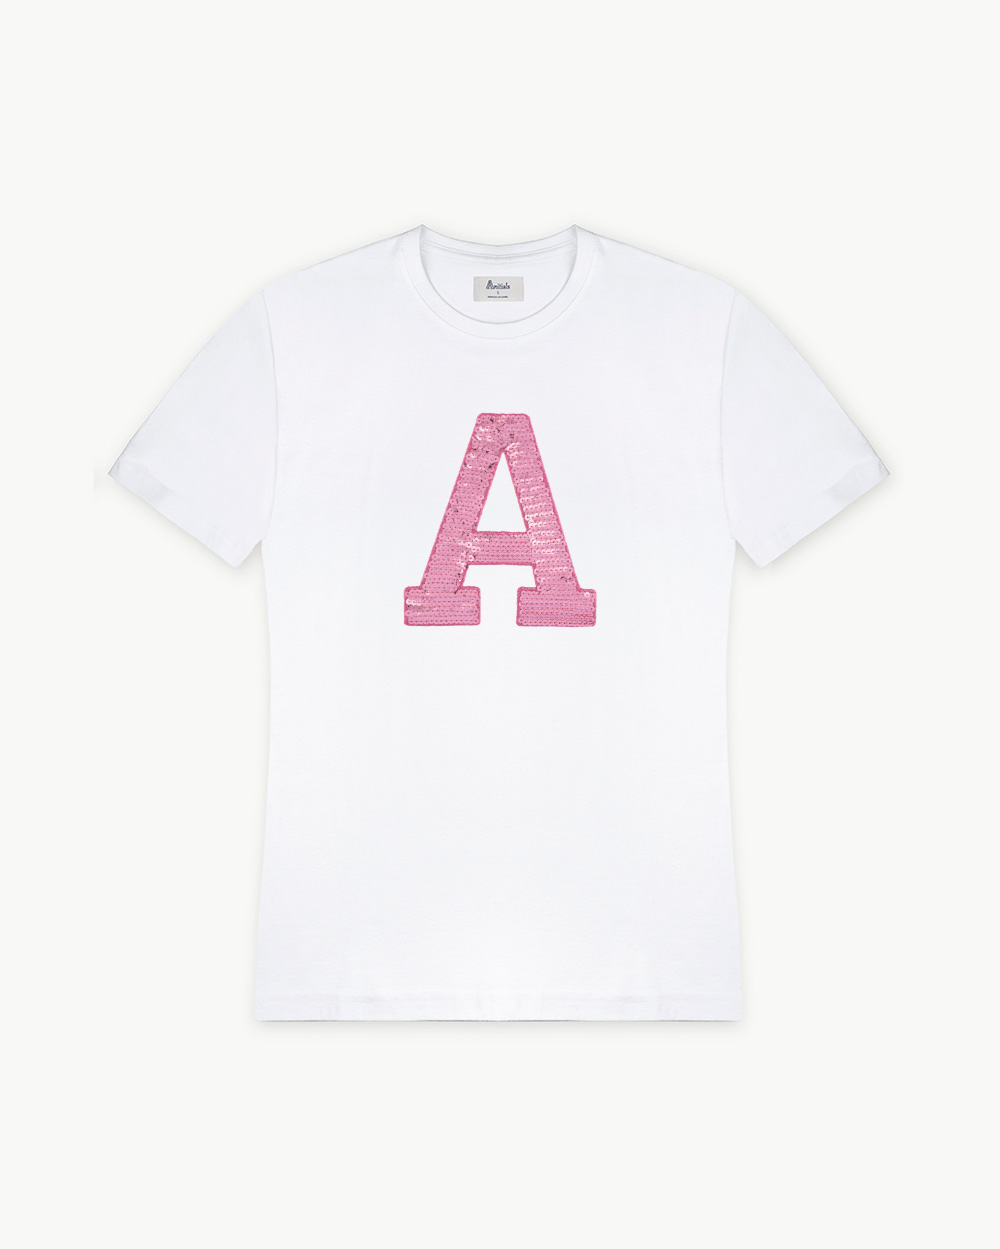 WHITE T-SHIRT | PINK SEQUINS INITIAL